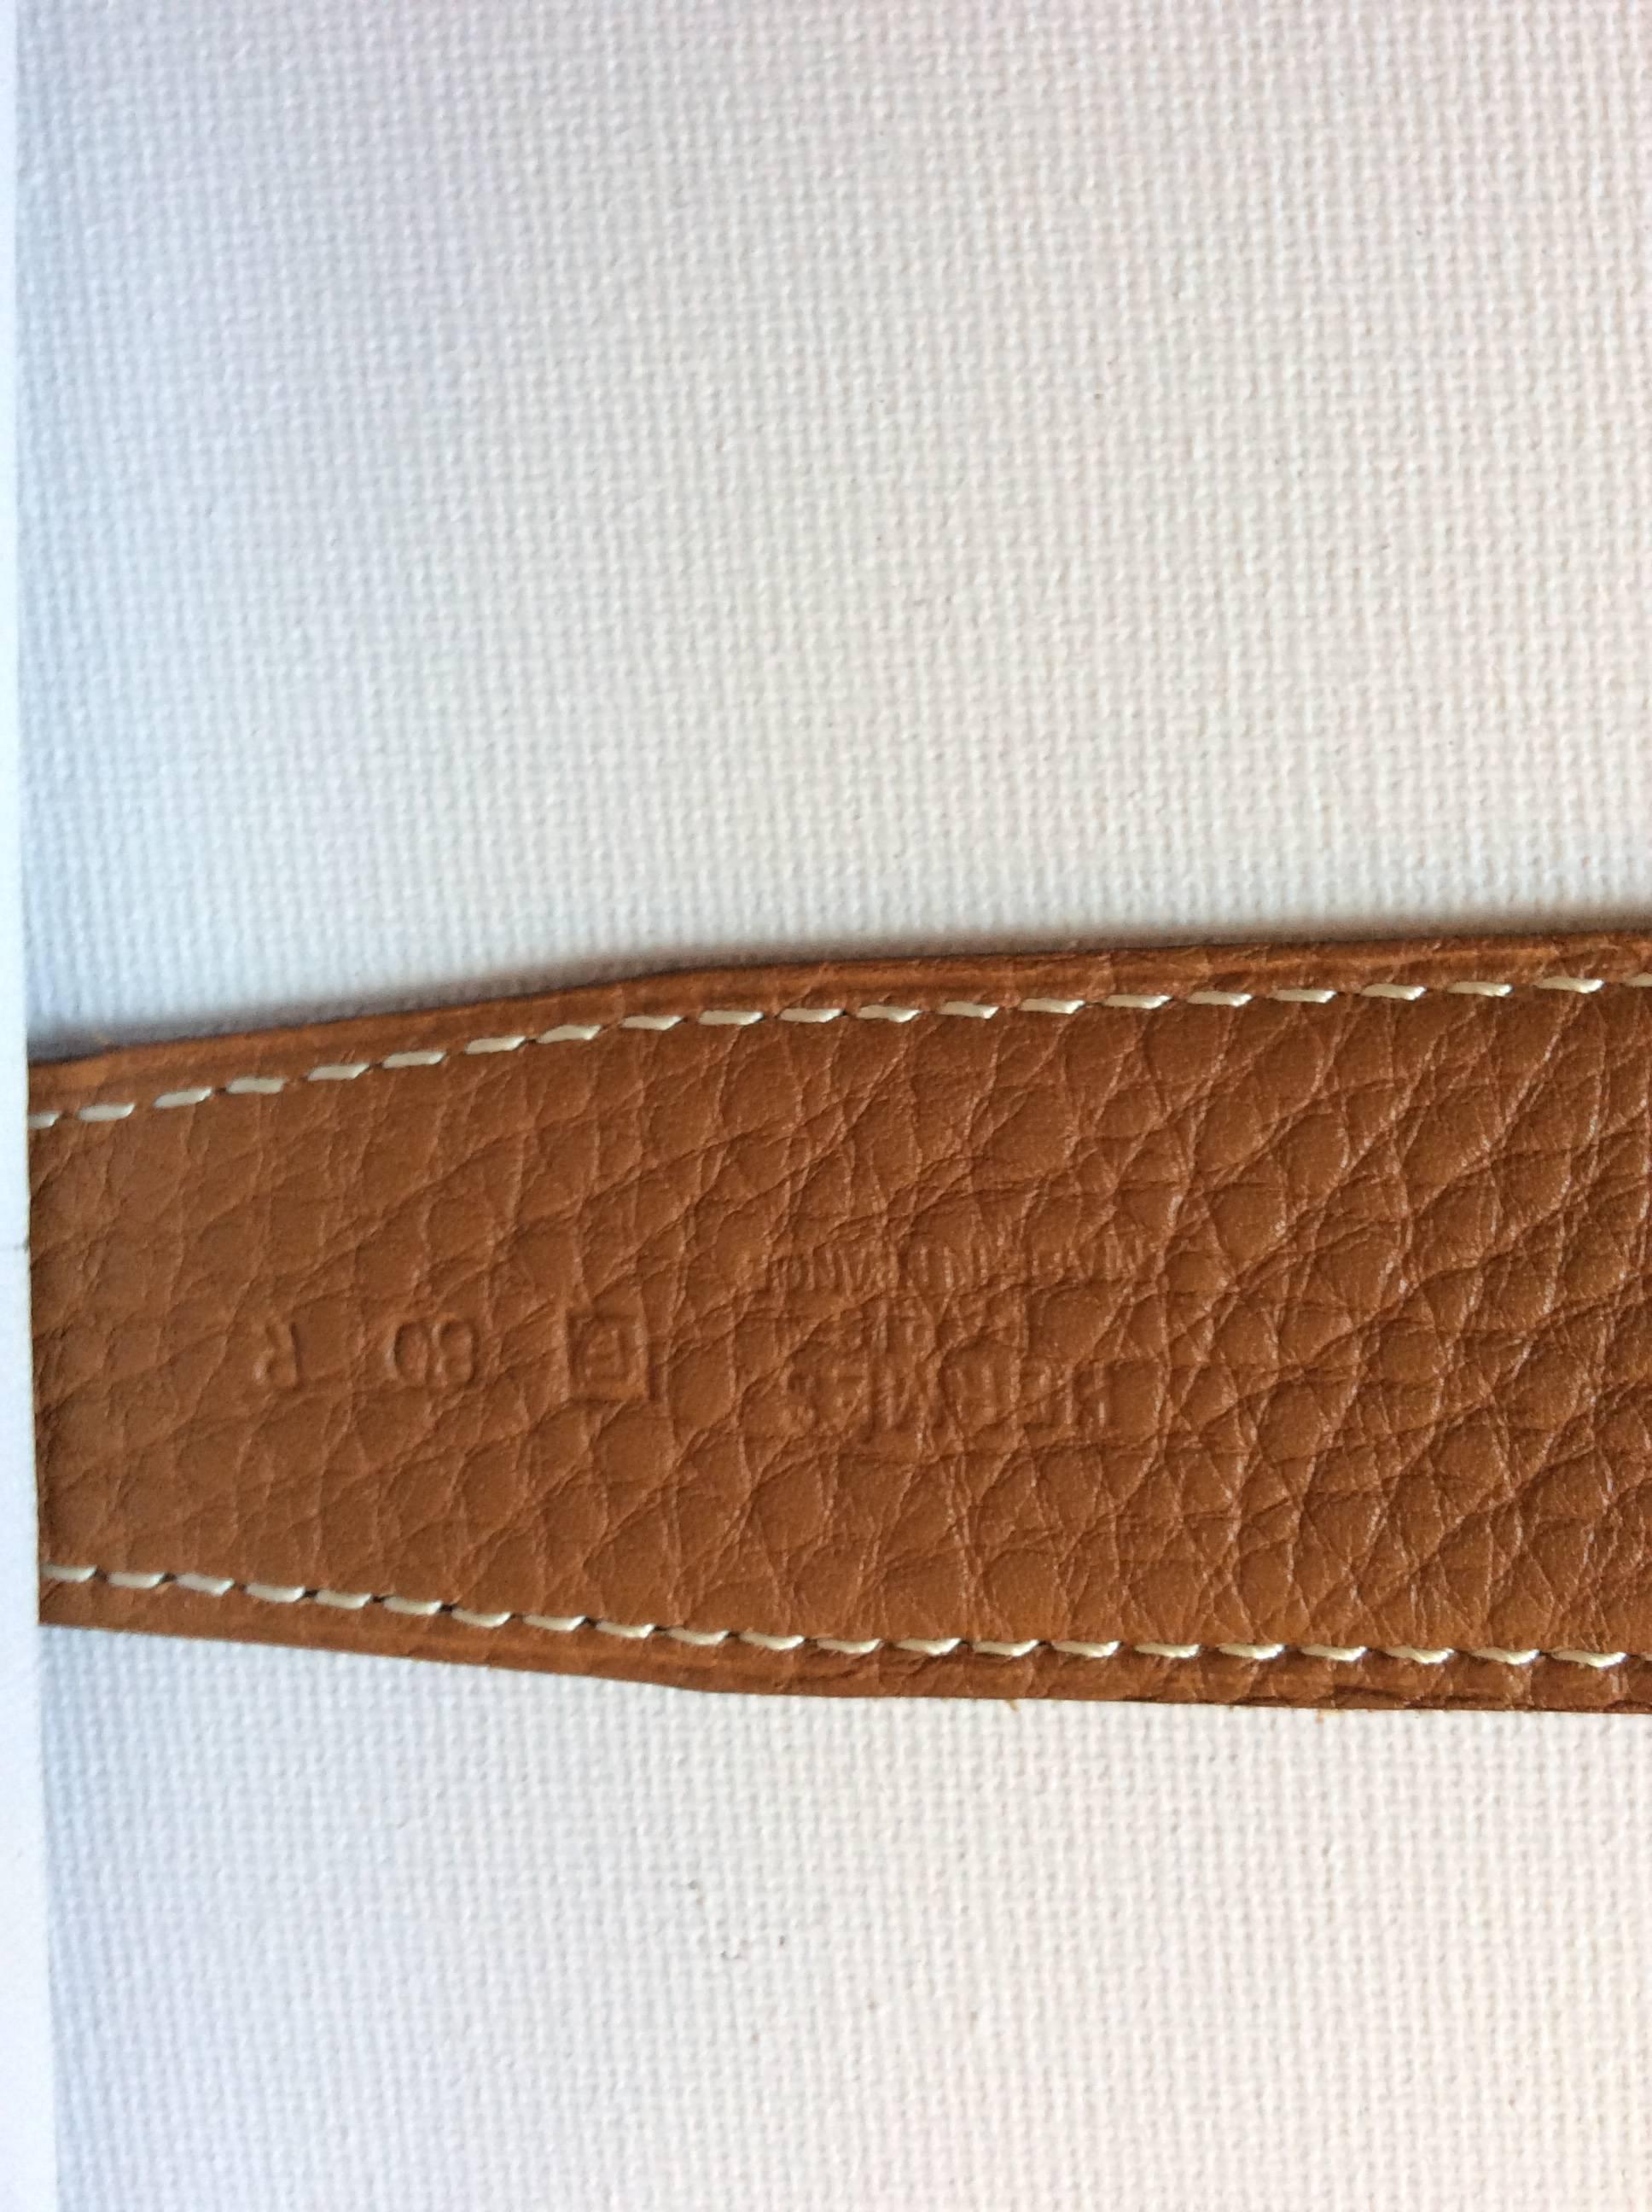 Women's Hermes Rare Silver Tone Belt with Strap